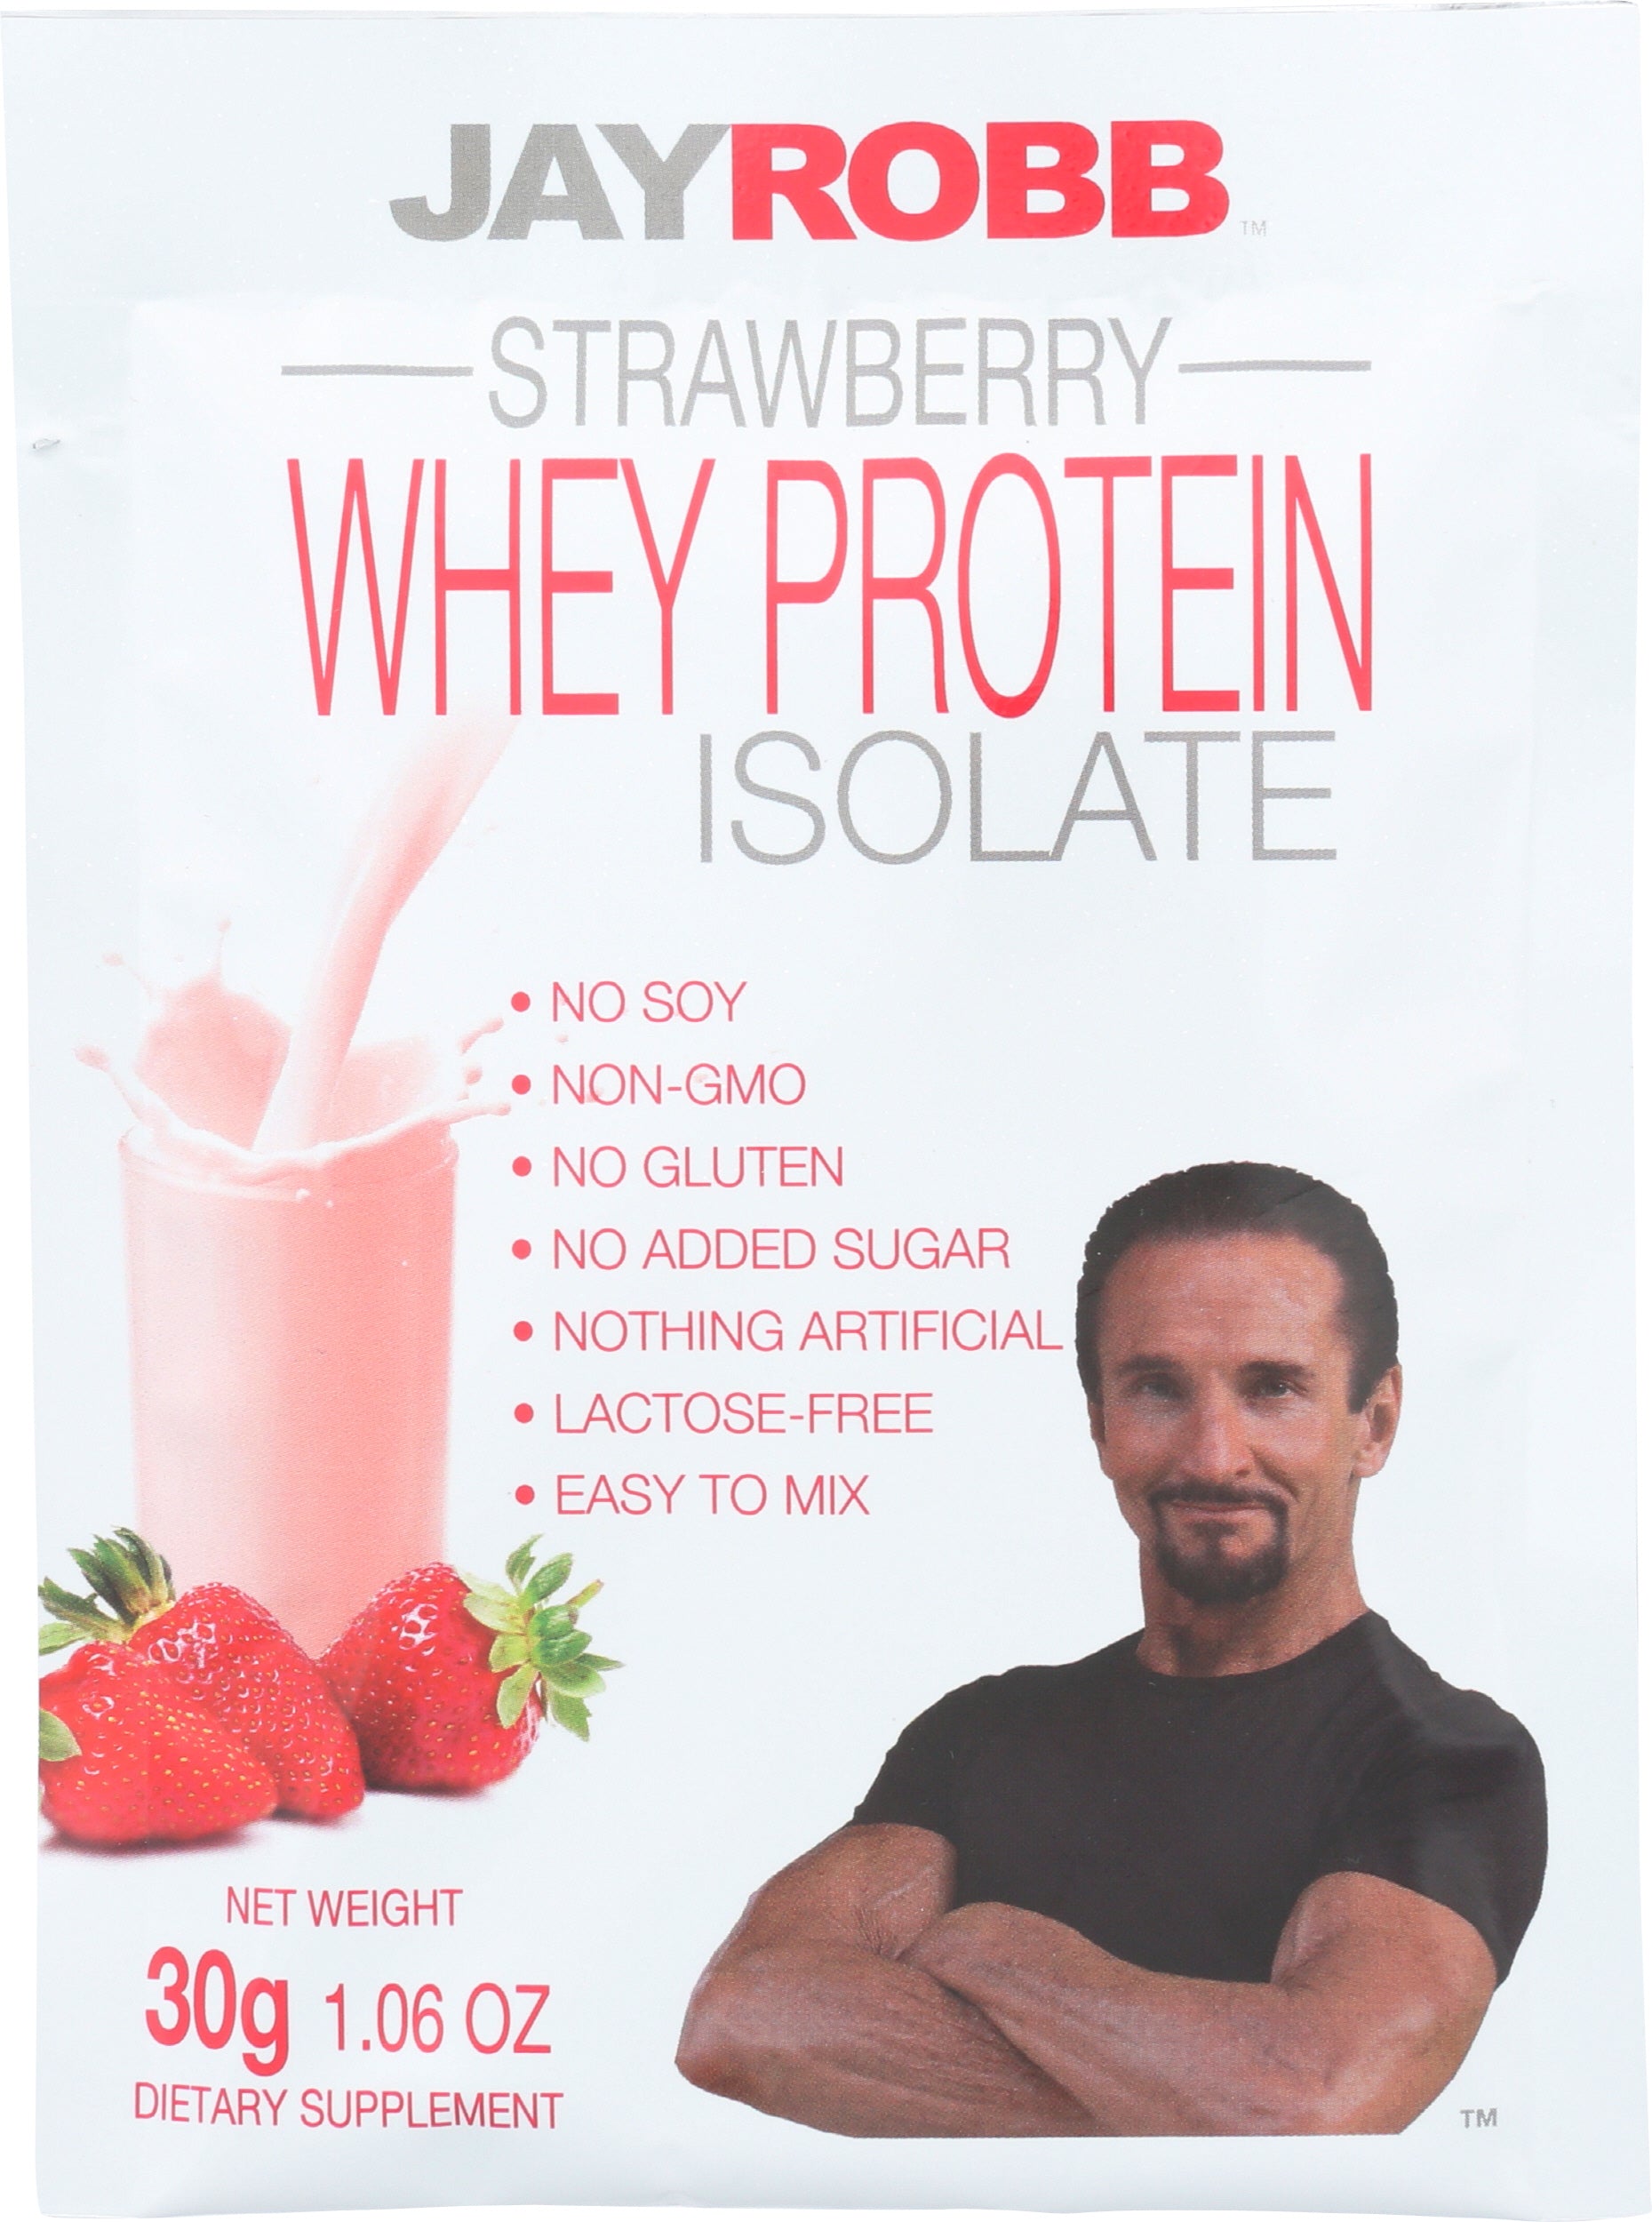 Jay Robb Strawberry Flavored Whey Protein Isolate 30g Front of Bag